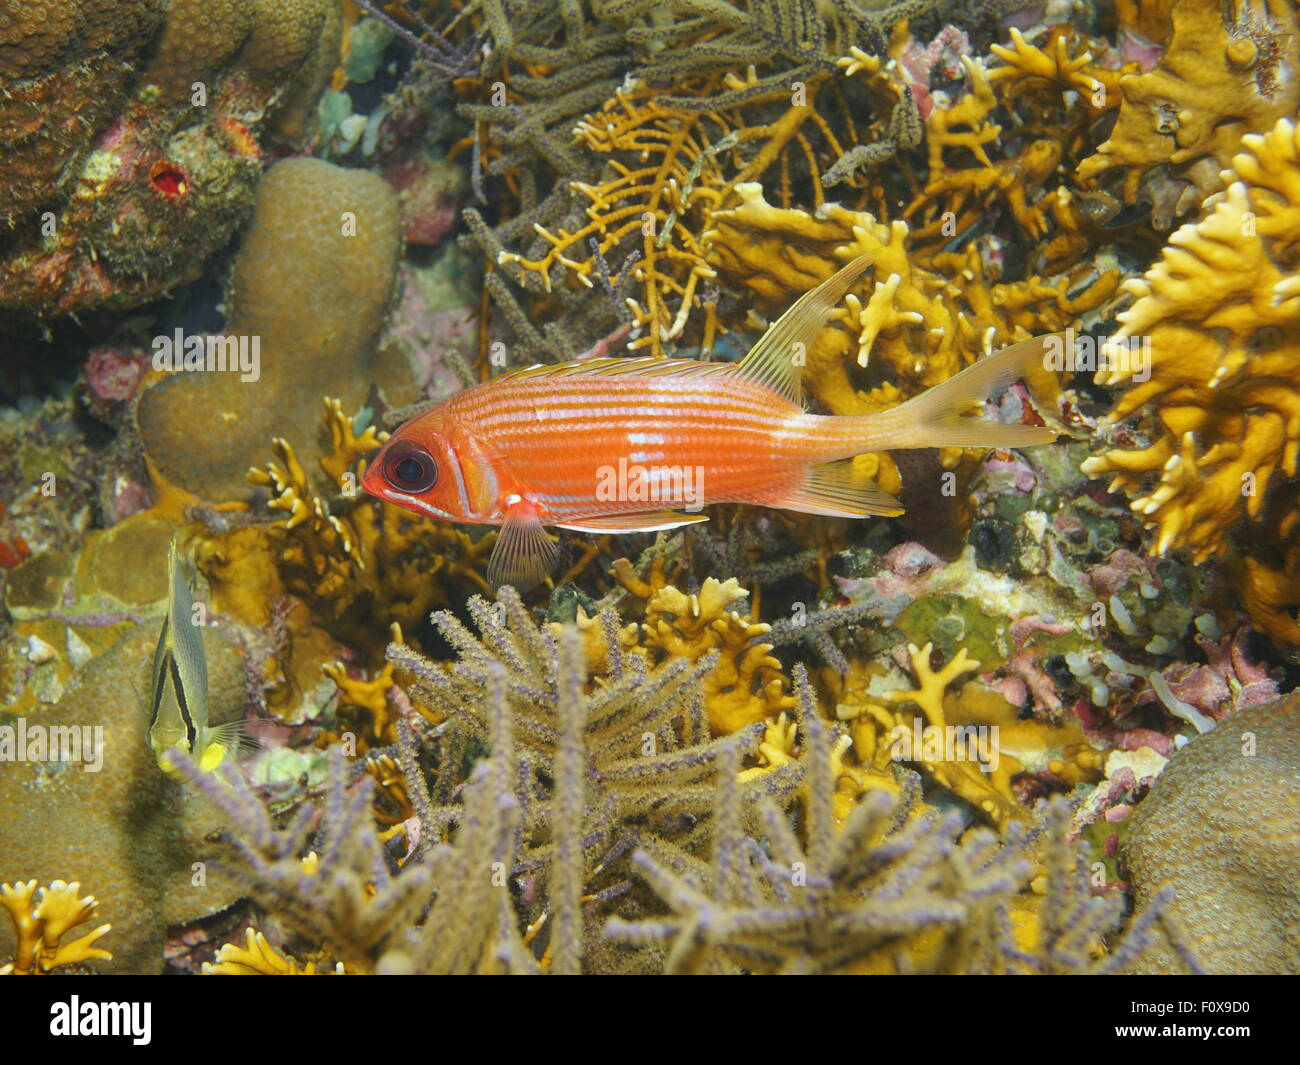 Tropical fish longspine squirrelfish, Holocentrus rufus, underwater in a coral reef, Caribbean sea Stock Photo